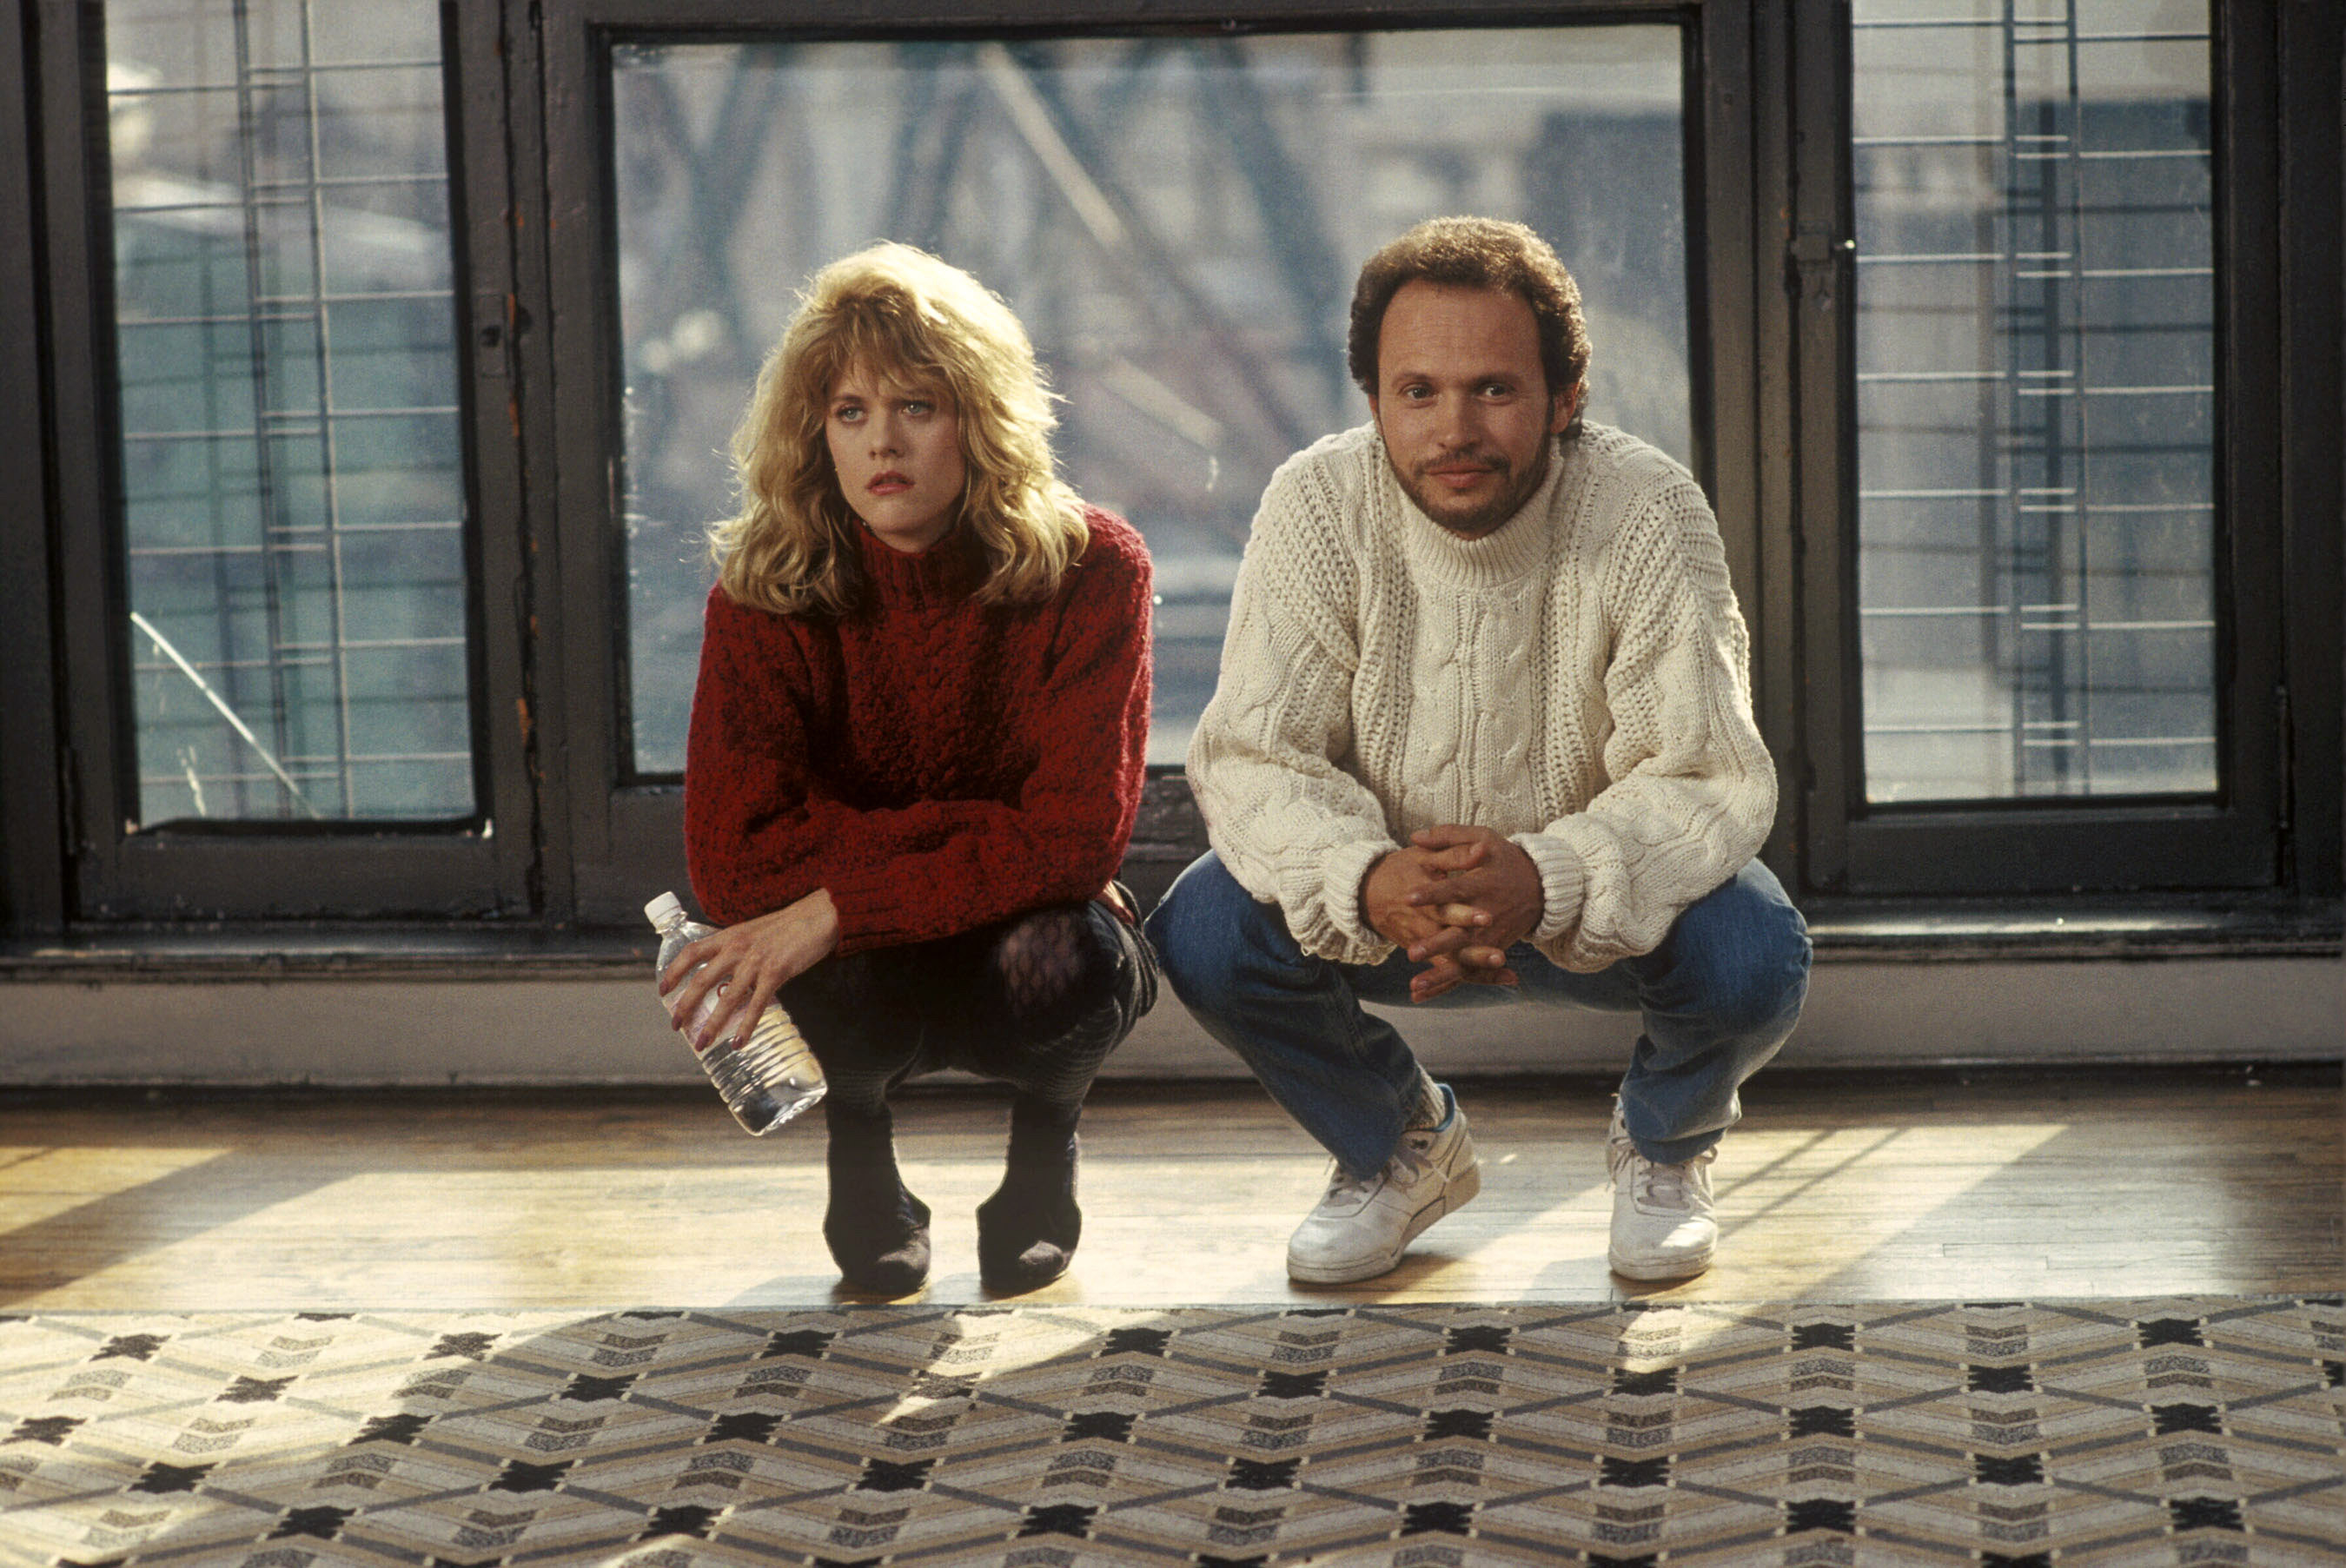 Meg Ryan and Billy Crystal squatting next to a large rug